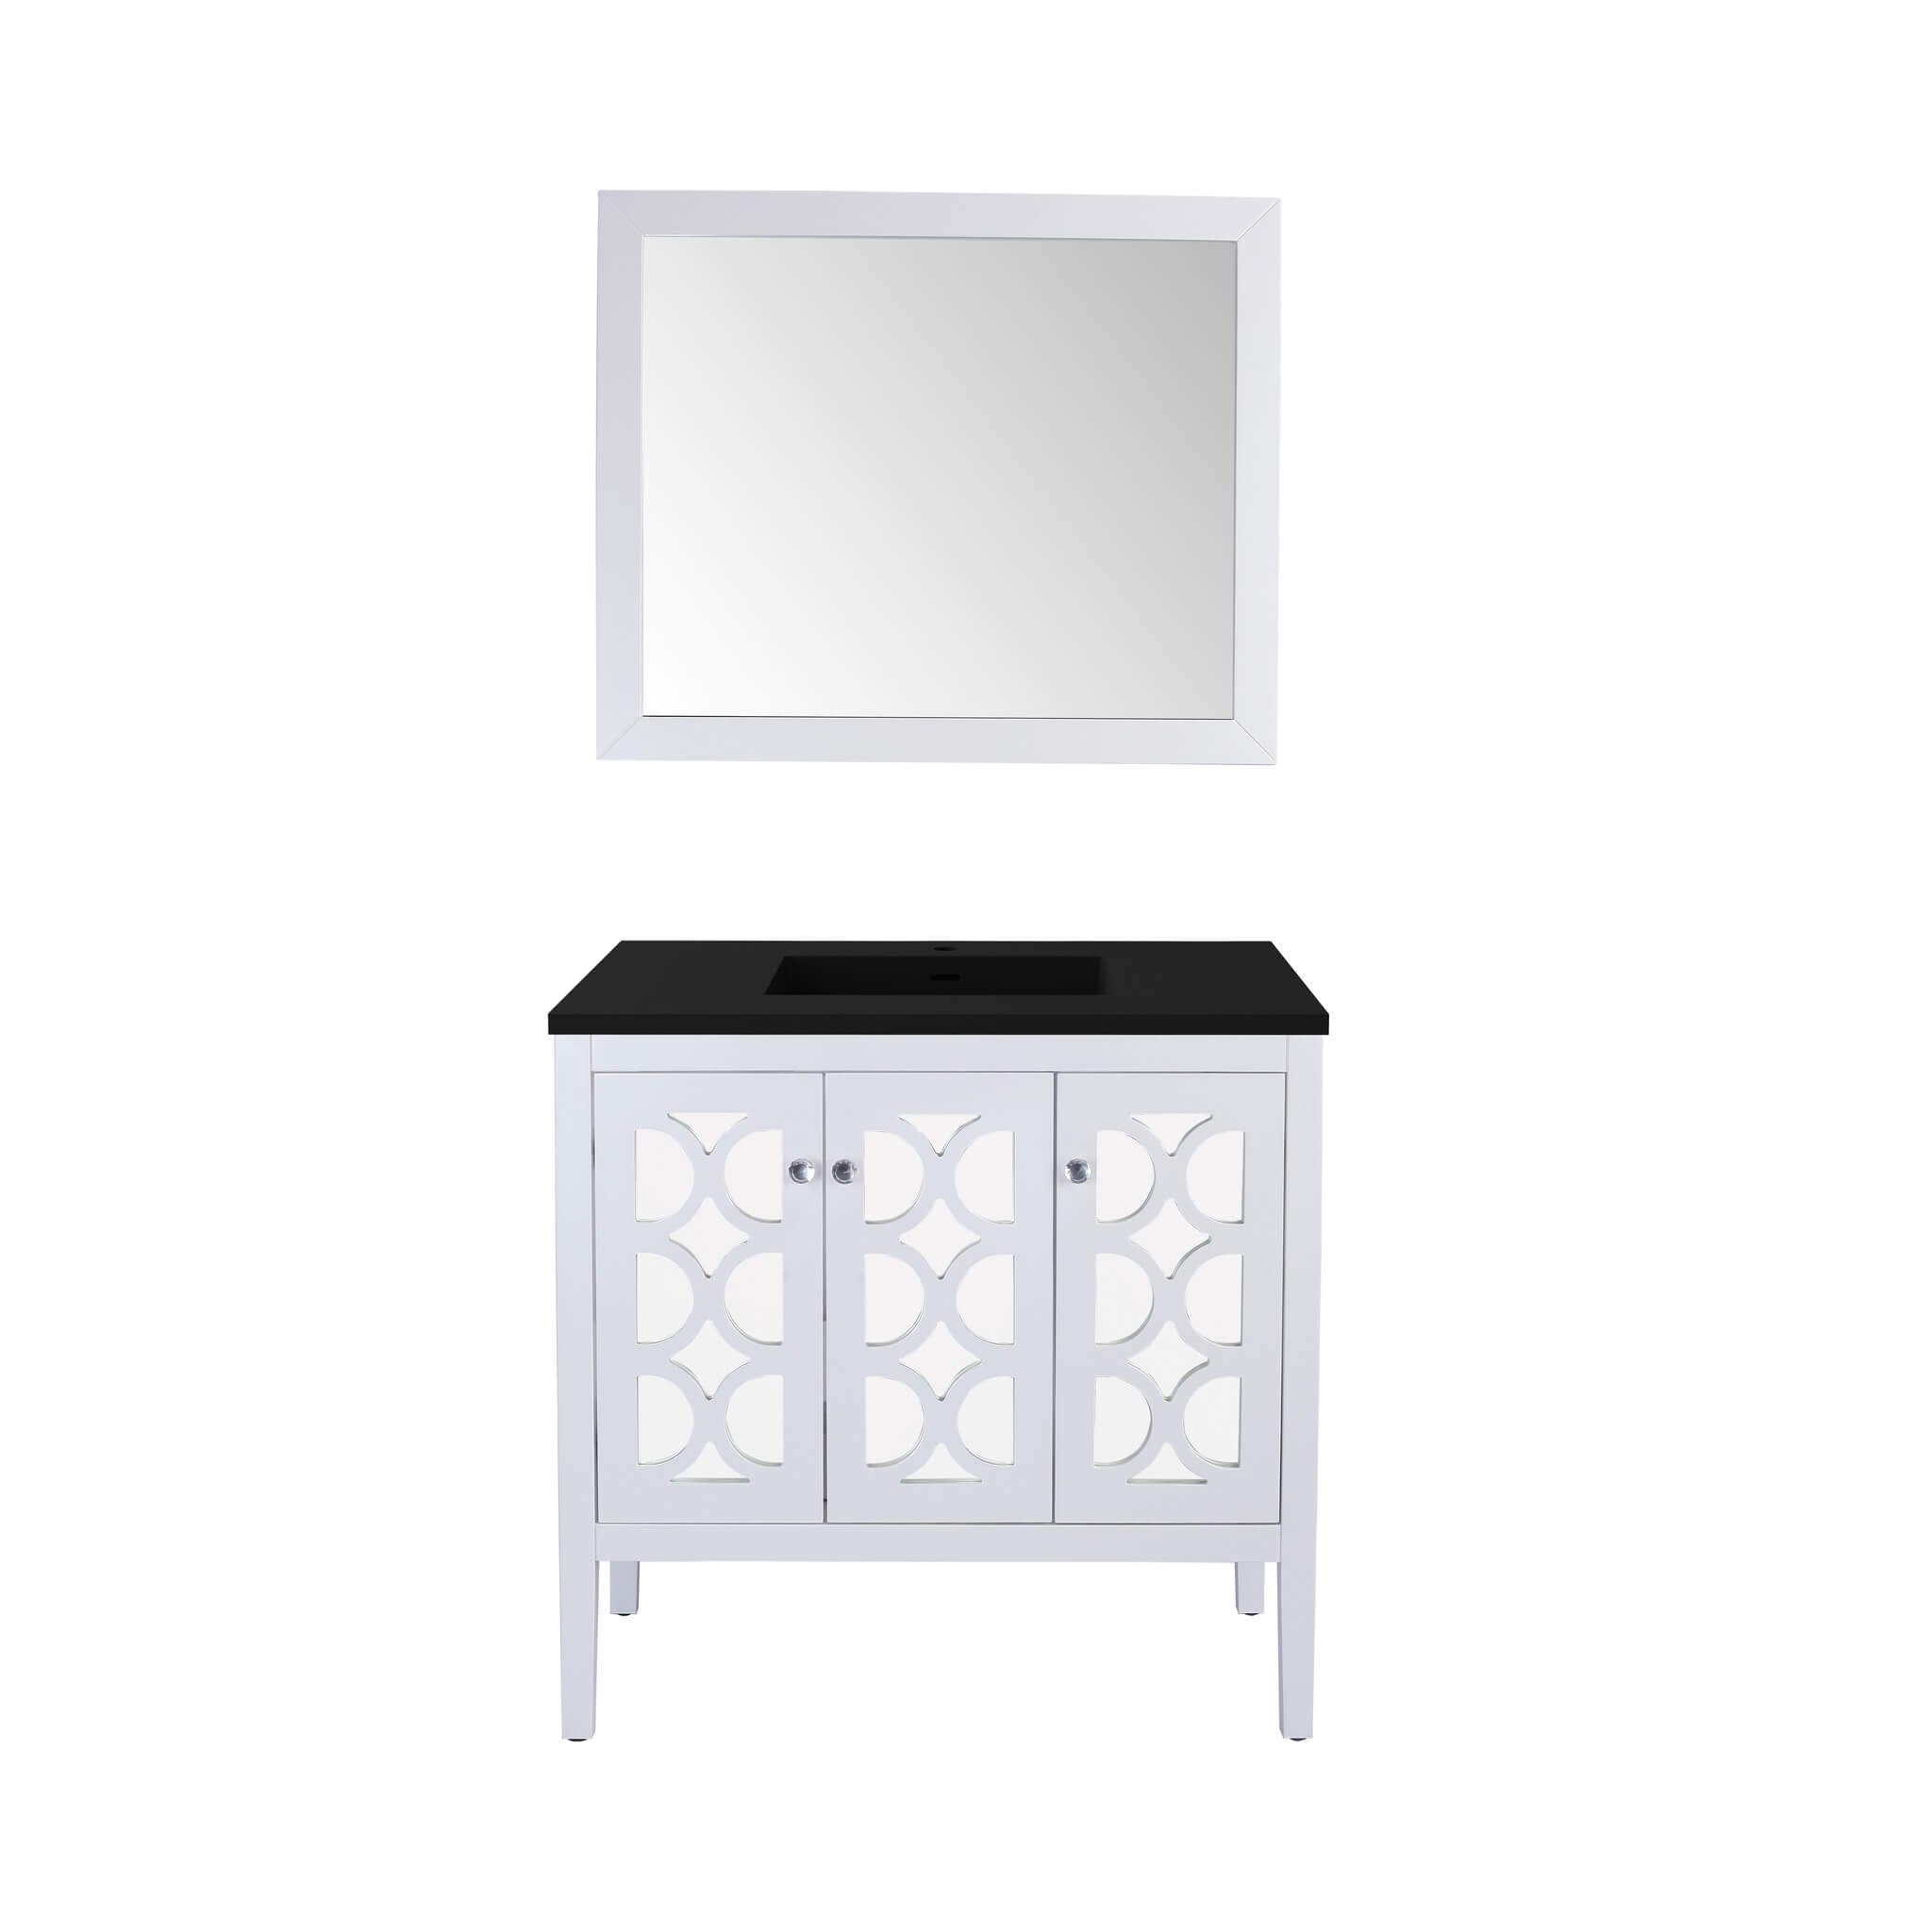 LAVIVA Mediterraneo 313MKSH-36W-MB 36" Single Bathroom Vanity in White with Matte Black VIVA Stone Surface, Integrated Sink, Front View